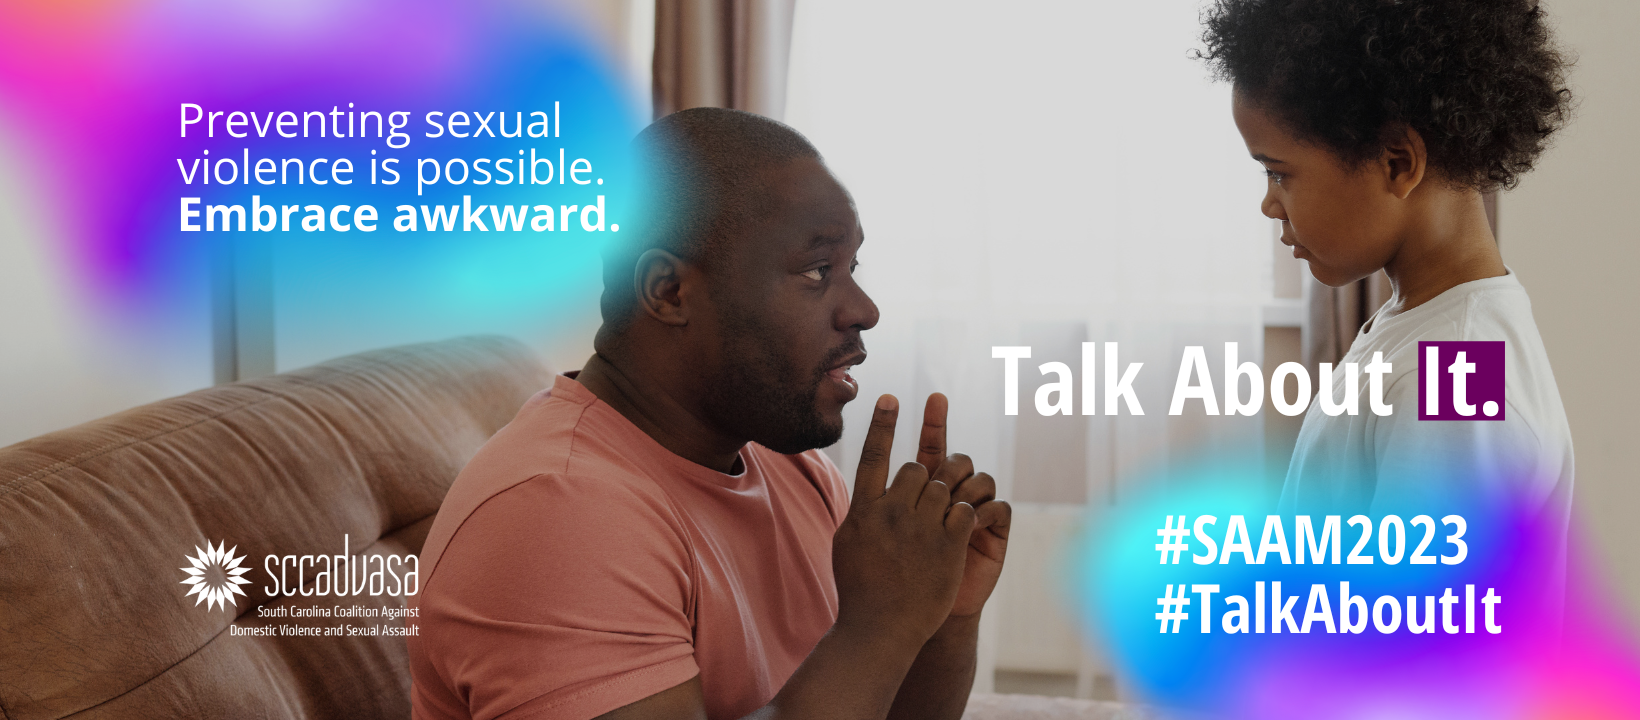 a Black father speaks to his young son with text that says 'Preventing sexual violence is possible. Embrace awkward. Talk about It. #SAAM2023 #TalkAboutIt' includes SCCADVASA logo